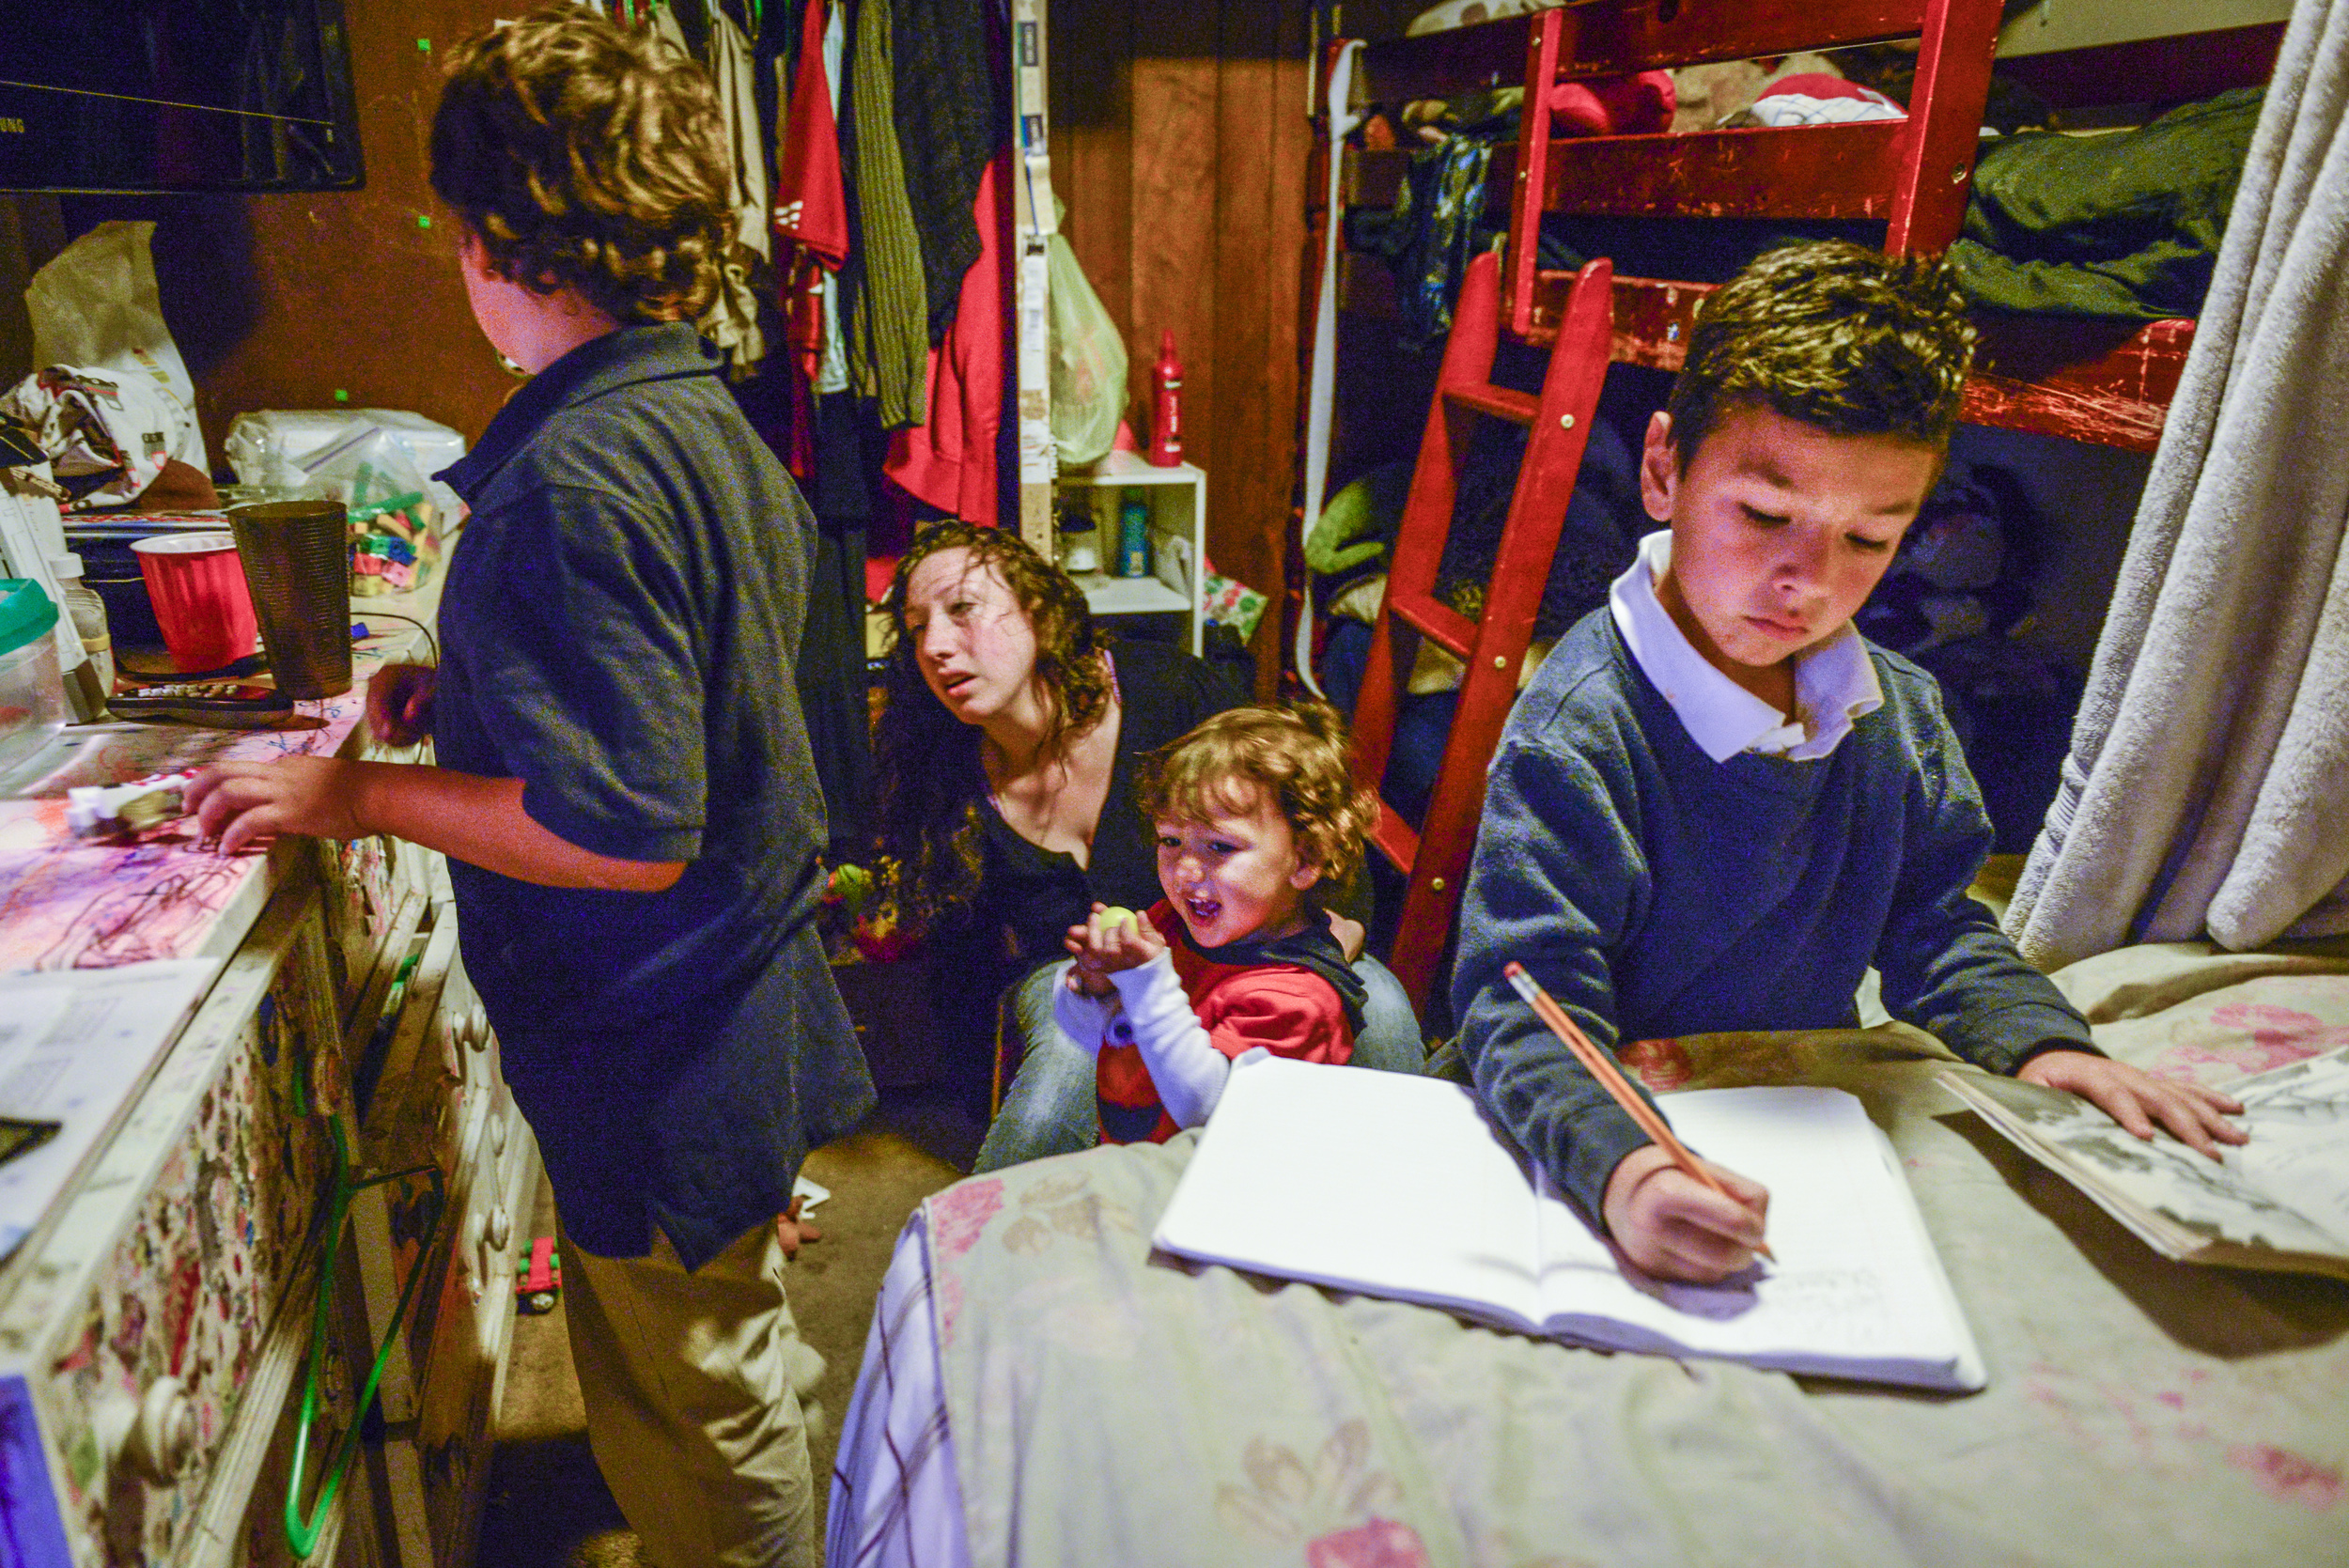  Mateo, 7, finishes his homework while Amanda helps Dominic and Christopher get ready to go to school. The studio they live in is so small there is no room for a table. The kids do their homework on their bed. 